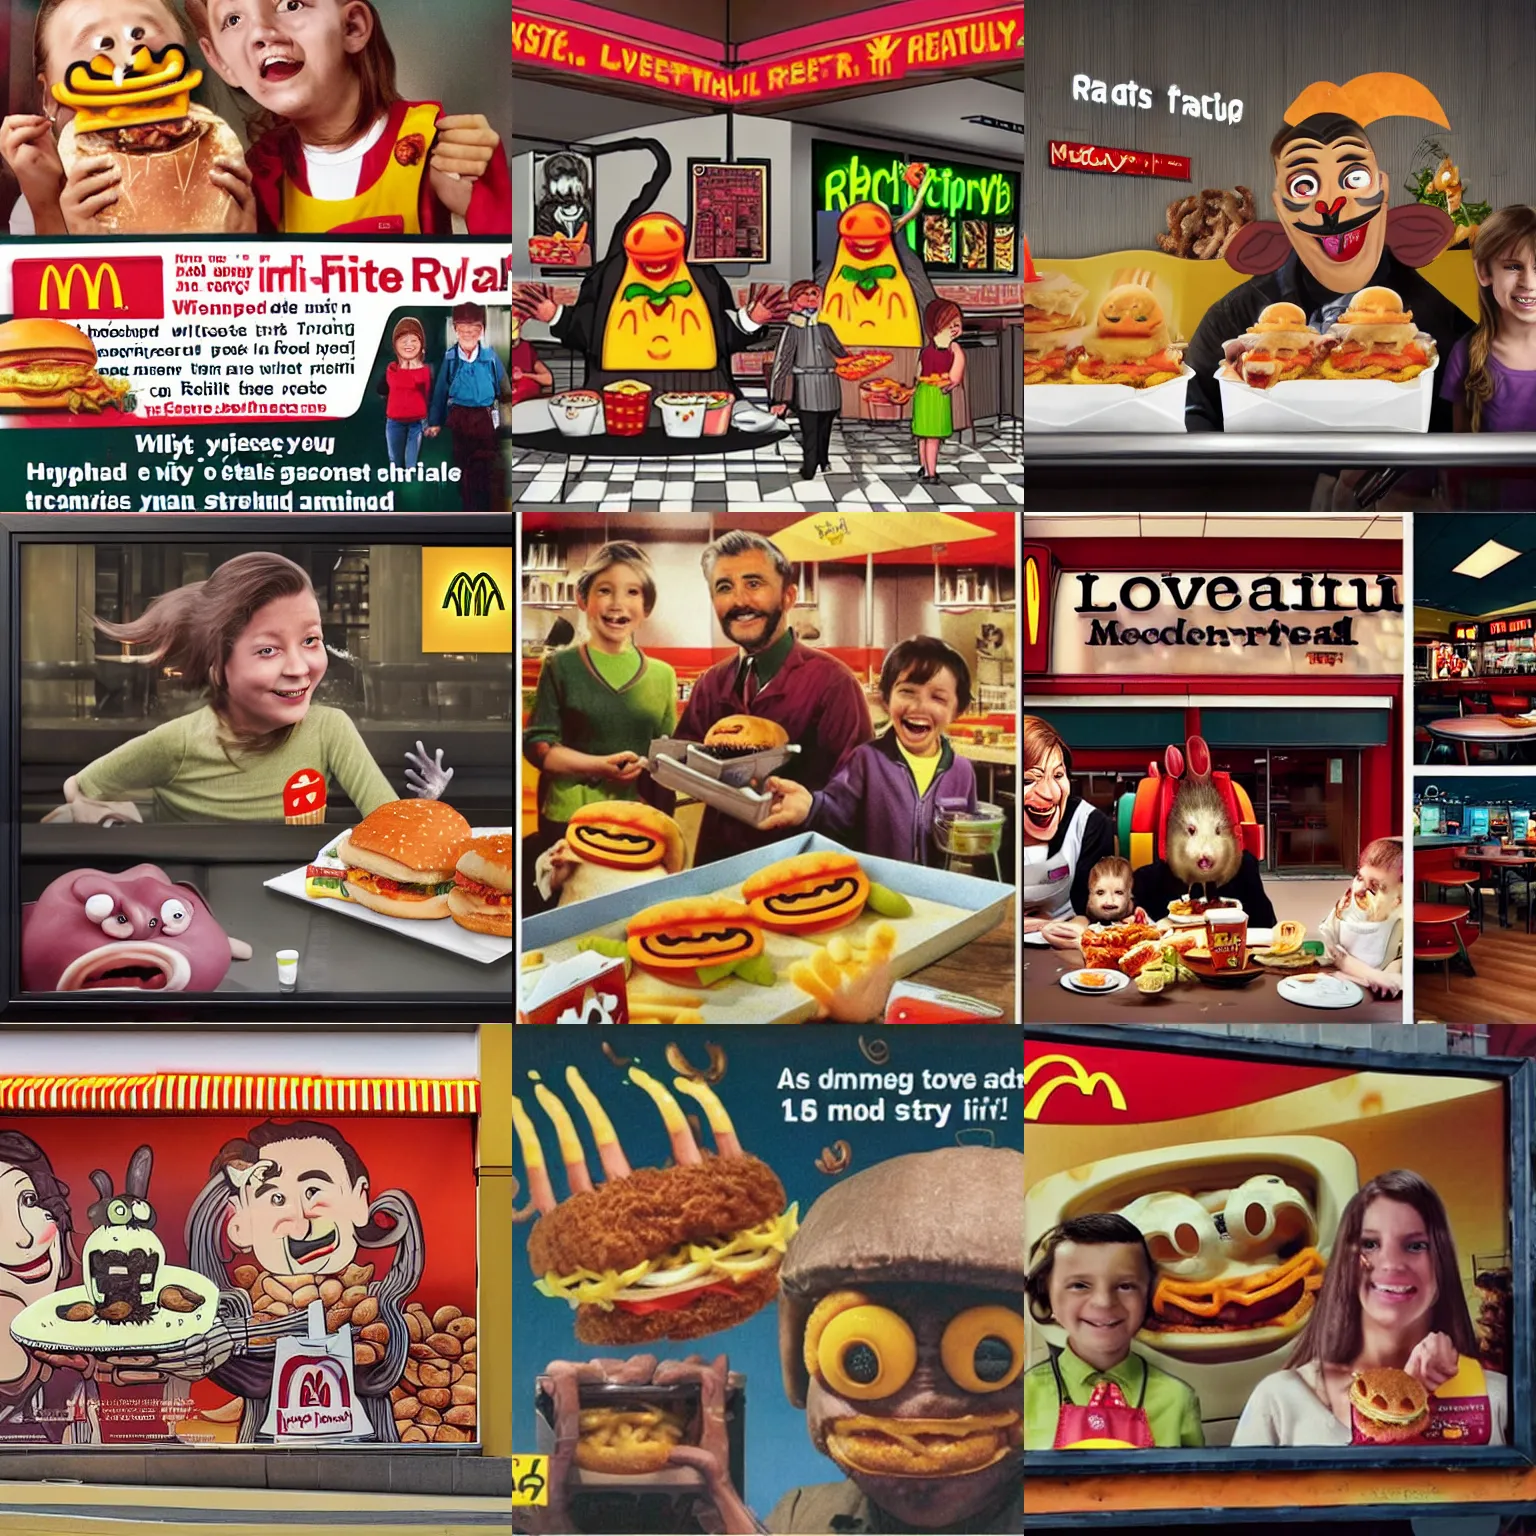 Prompt: dystopian! Lovecraftian ratty McDonalds! advertisement showing a smiling family being served a tray of rats! in the style of H.R. Giger